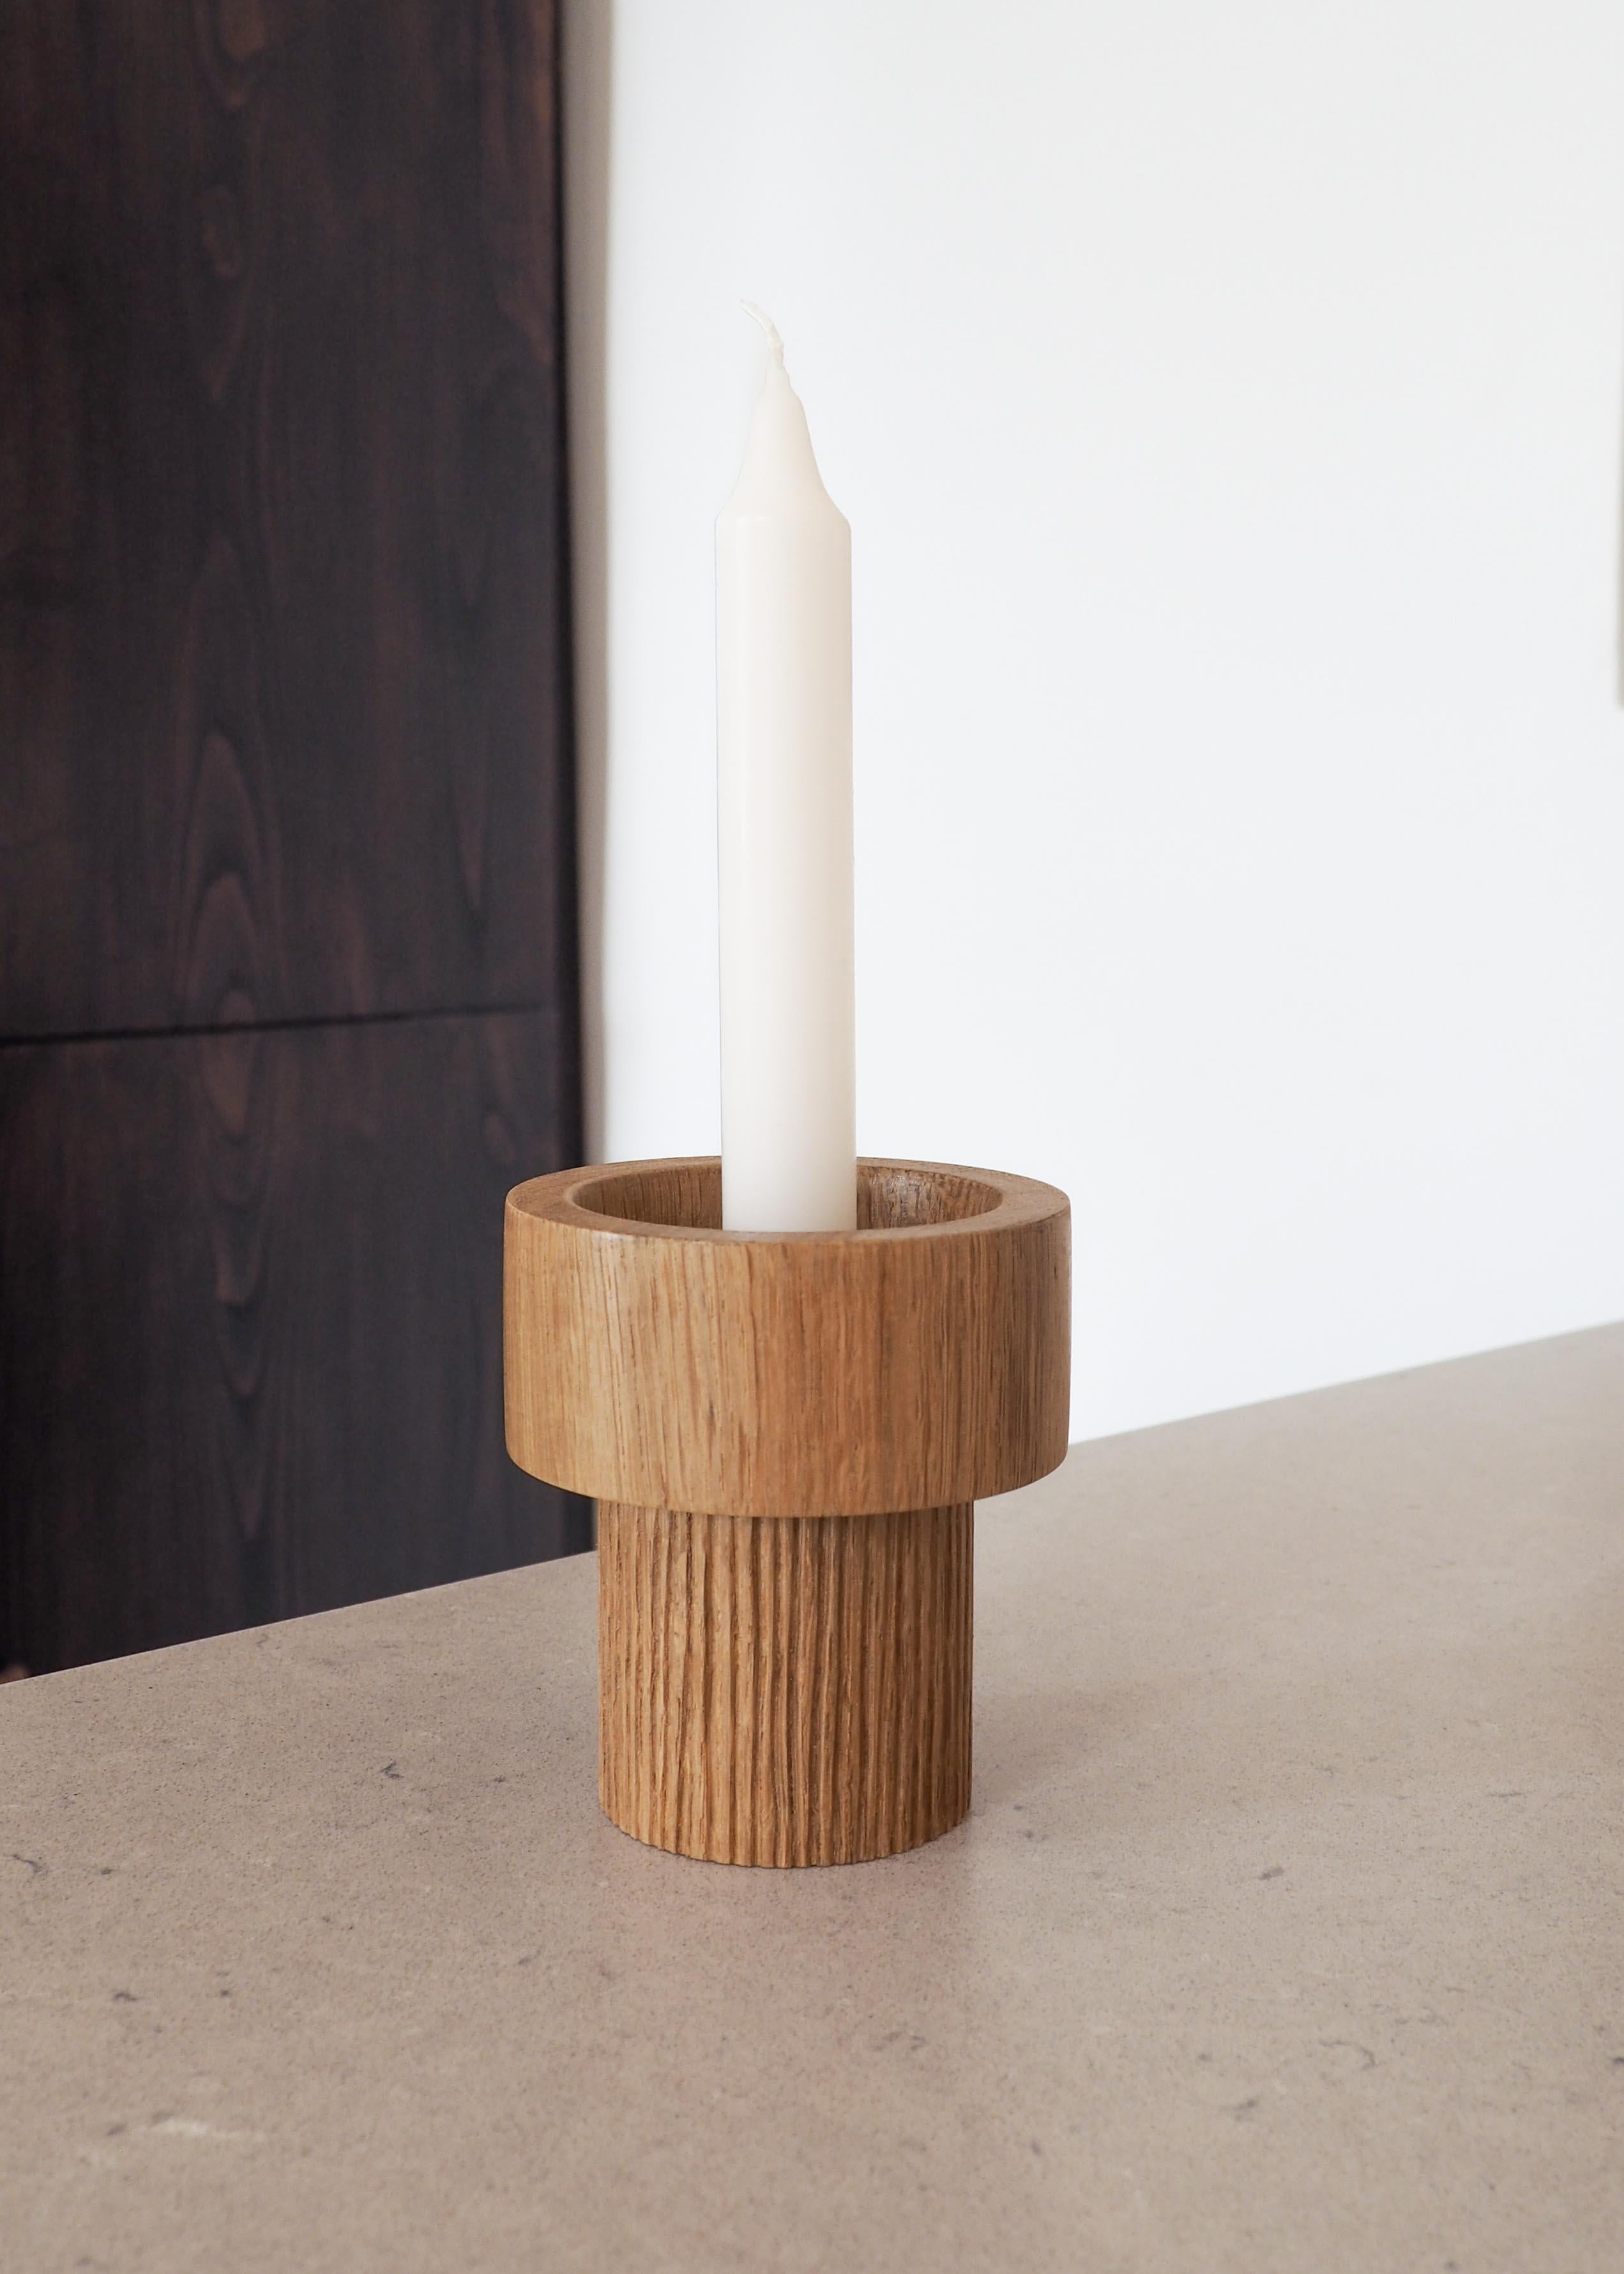 This oak candlestick was turned in the south of France. The gouge carving on the lower part adds texture to the piece. Its shape allows for different types of candles. A matt varnish has been applied to protect the wood without altering its natural